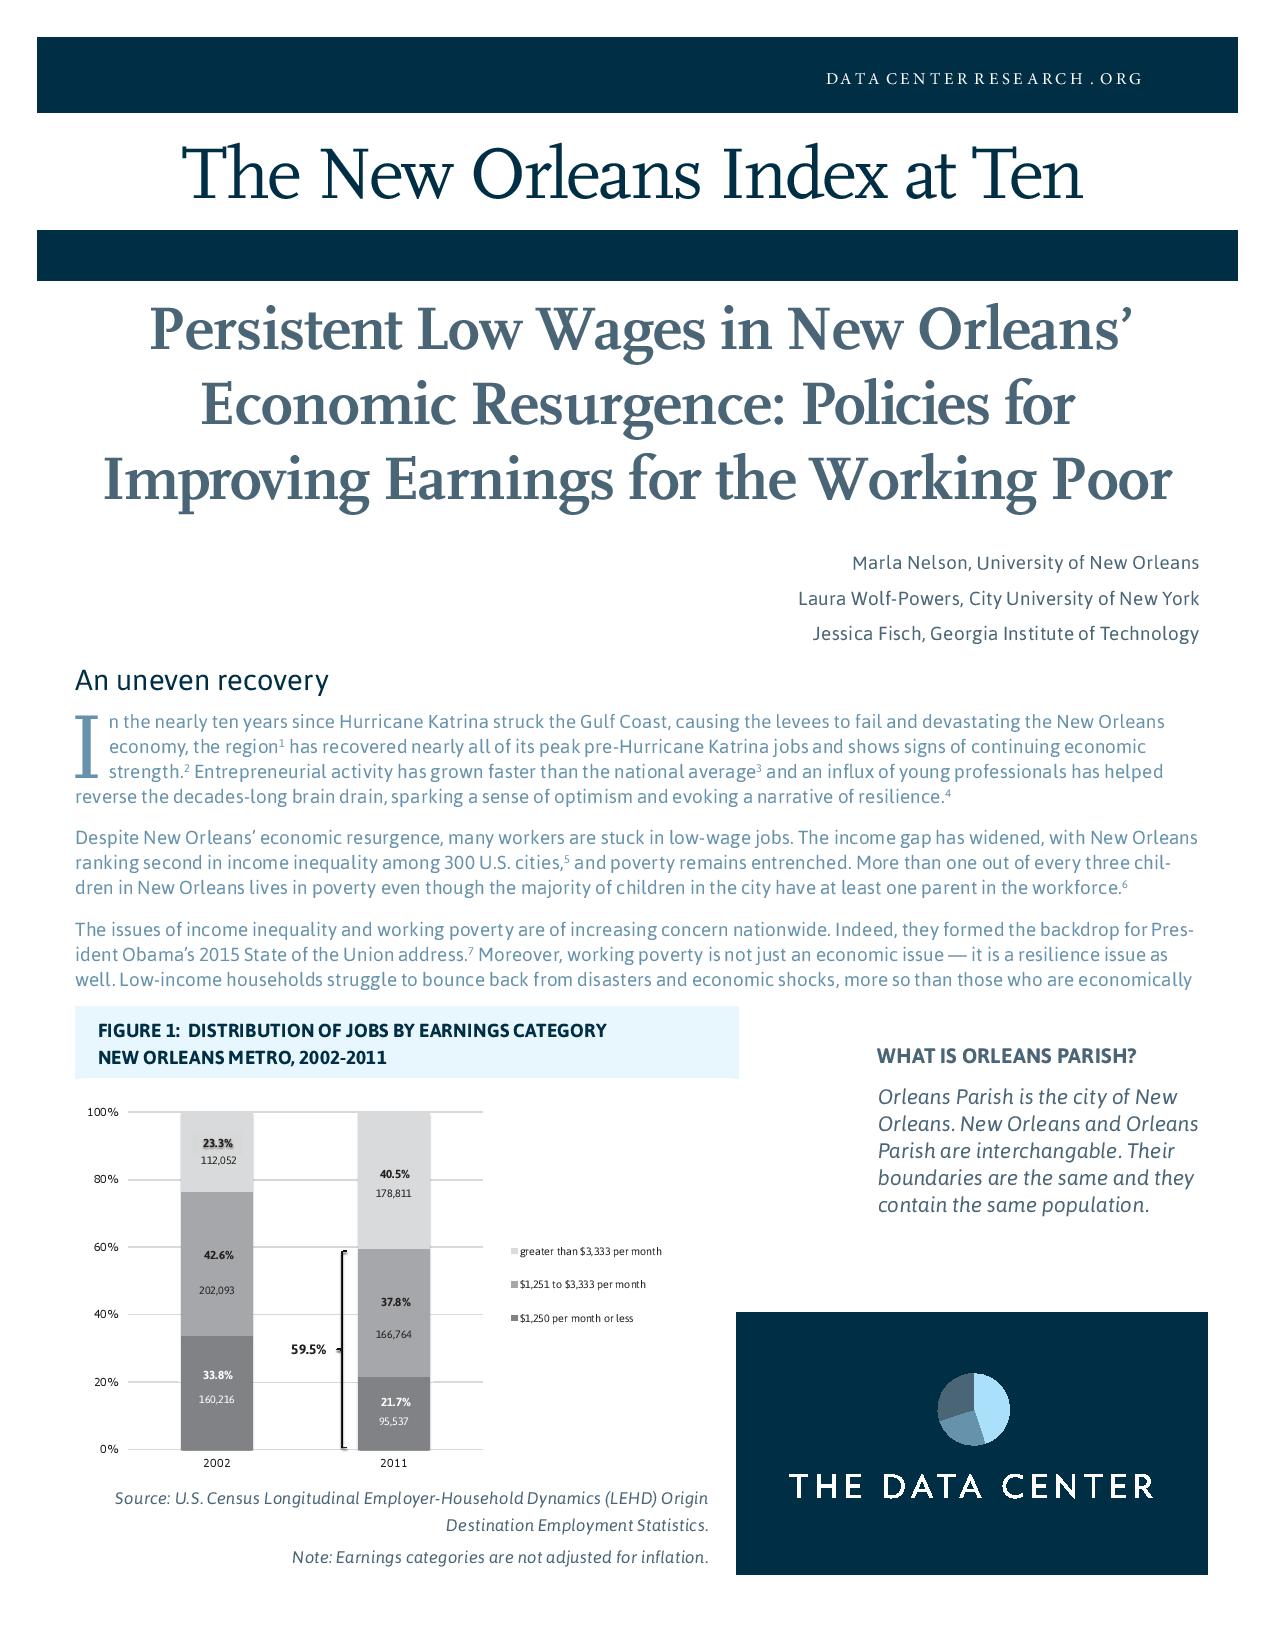 Persistent Low Wages in New Orleans’ Economic Resurgence: Policies for Improving Earnings for the Working Poor